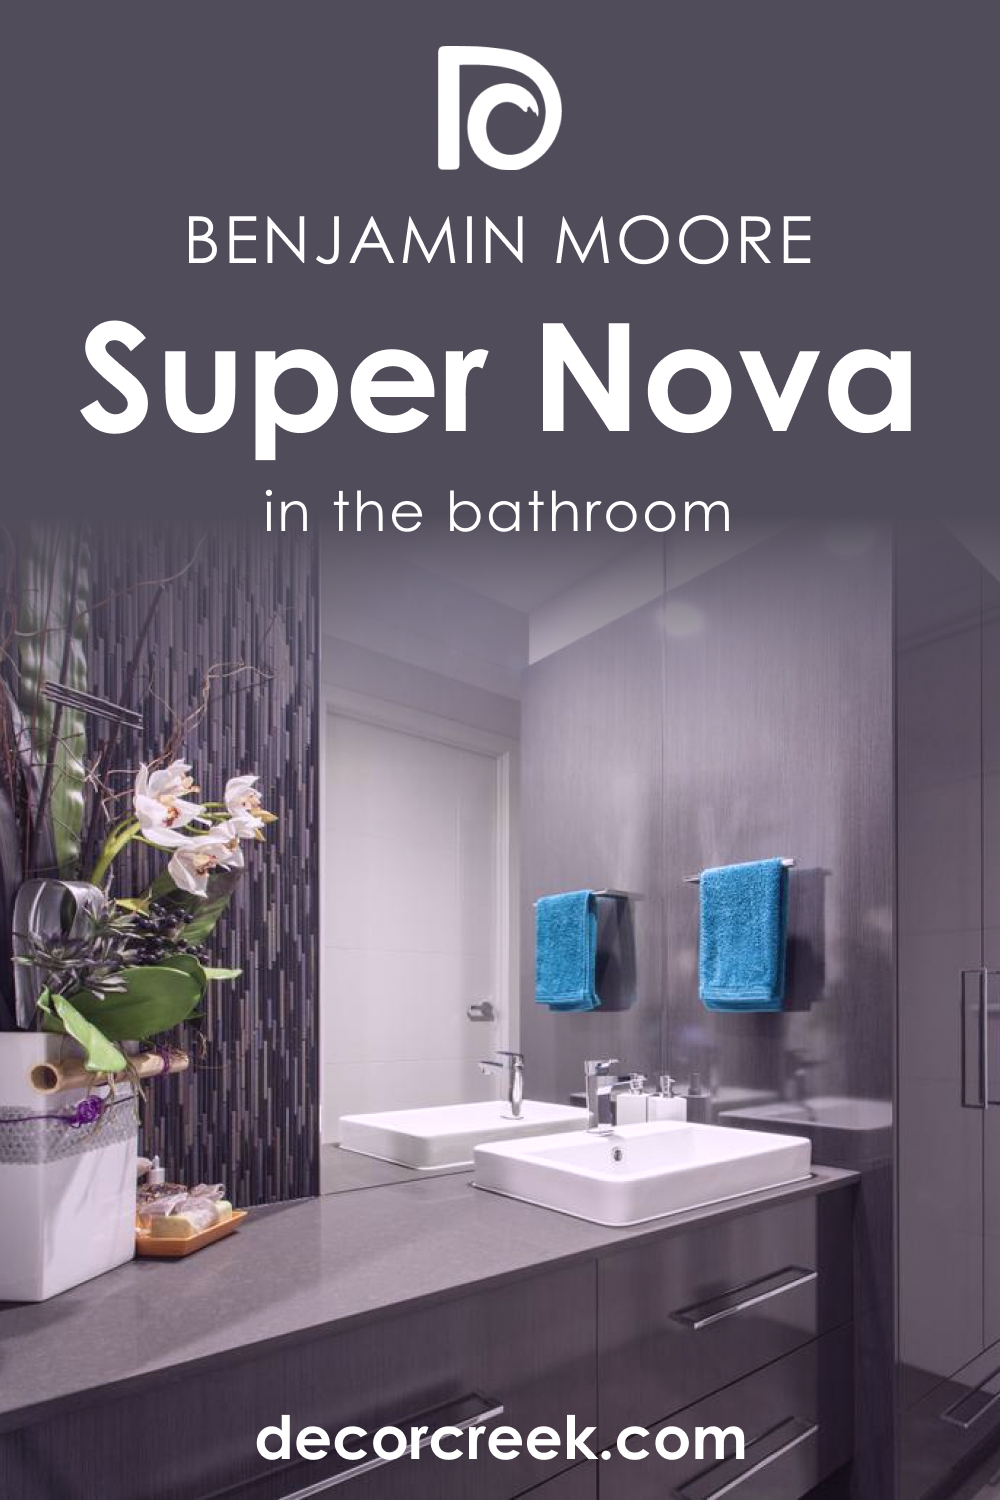 How to Use Super Nova 1414 in the Bathroom?